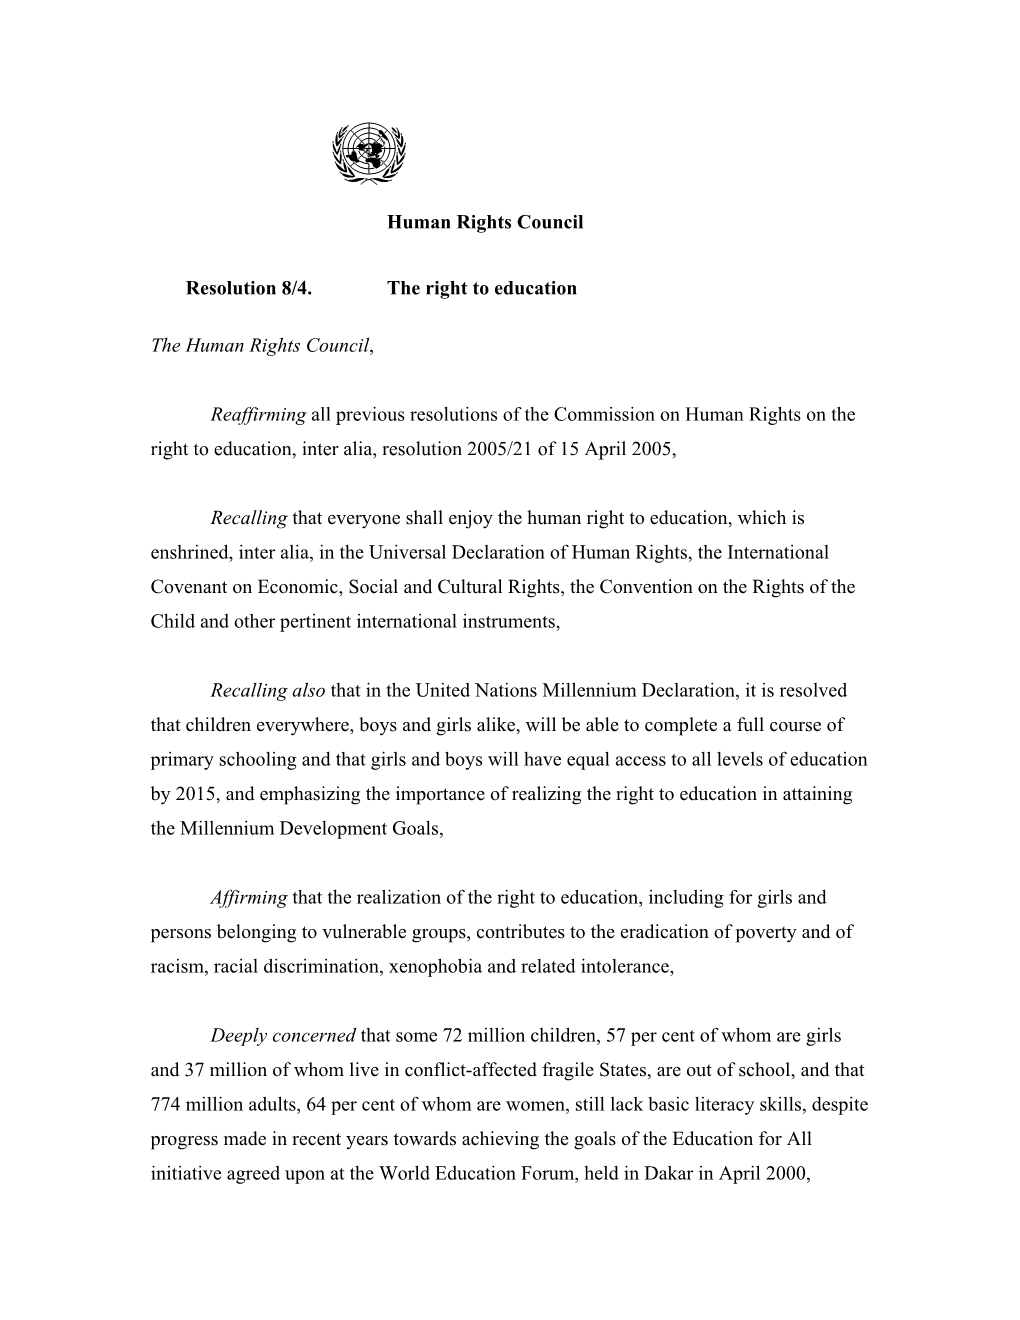 Human Rights Council Resolution 8/4. the Right to Education the Human Rights Council, Reaffirming All Previous Resolutions of Th